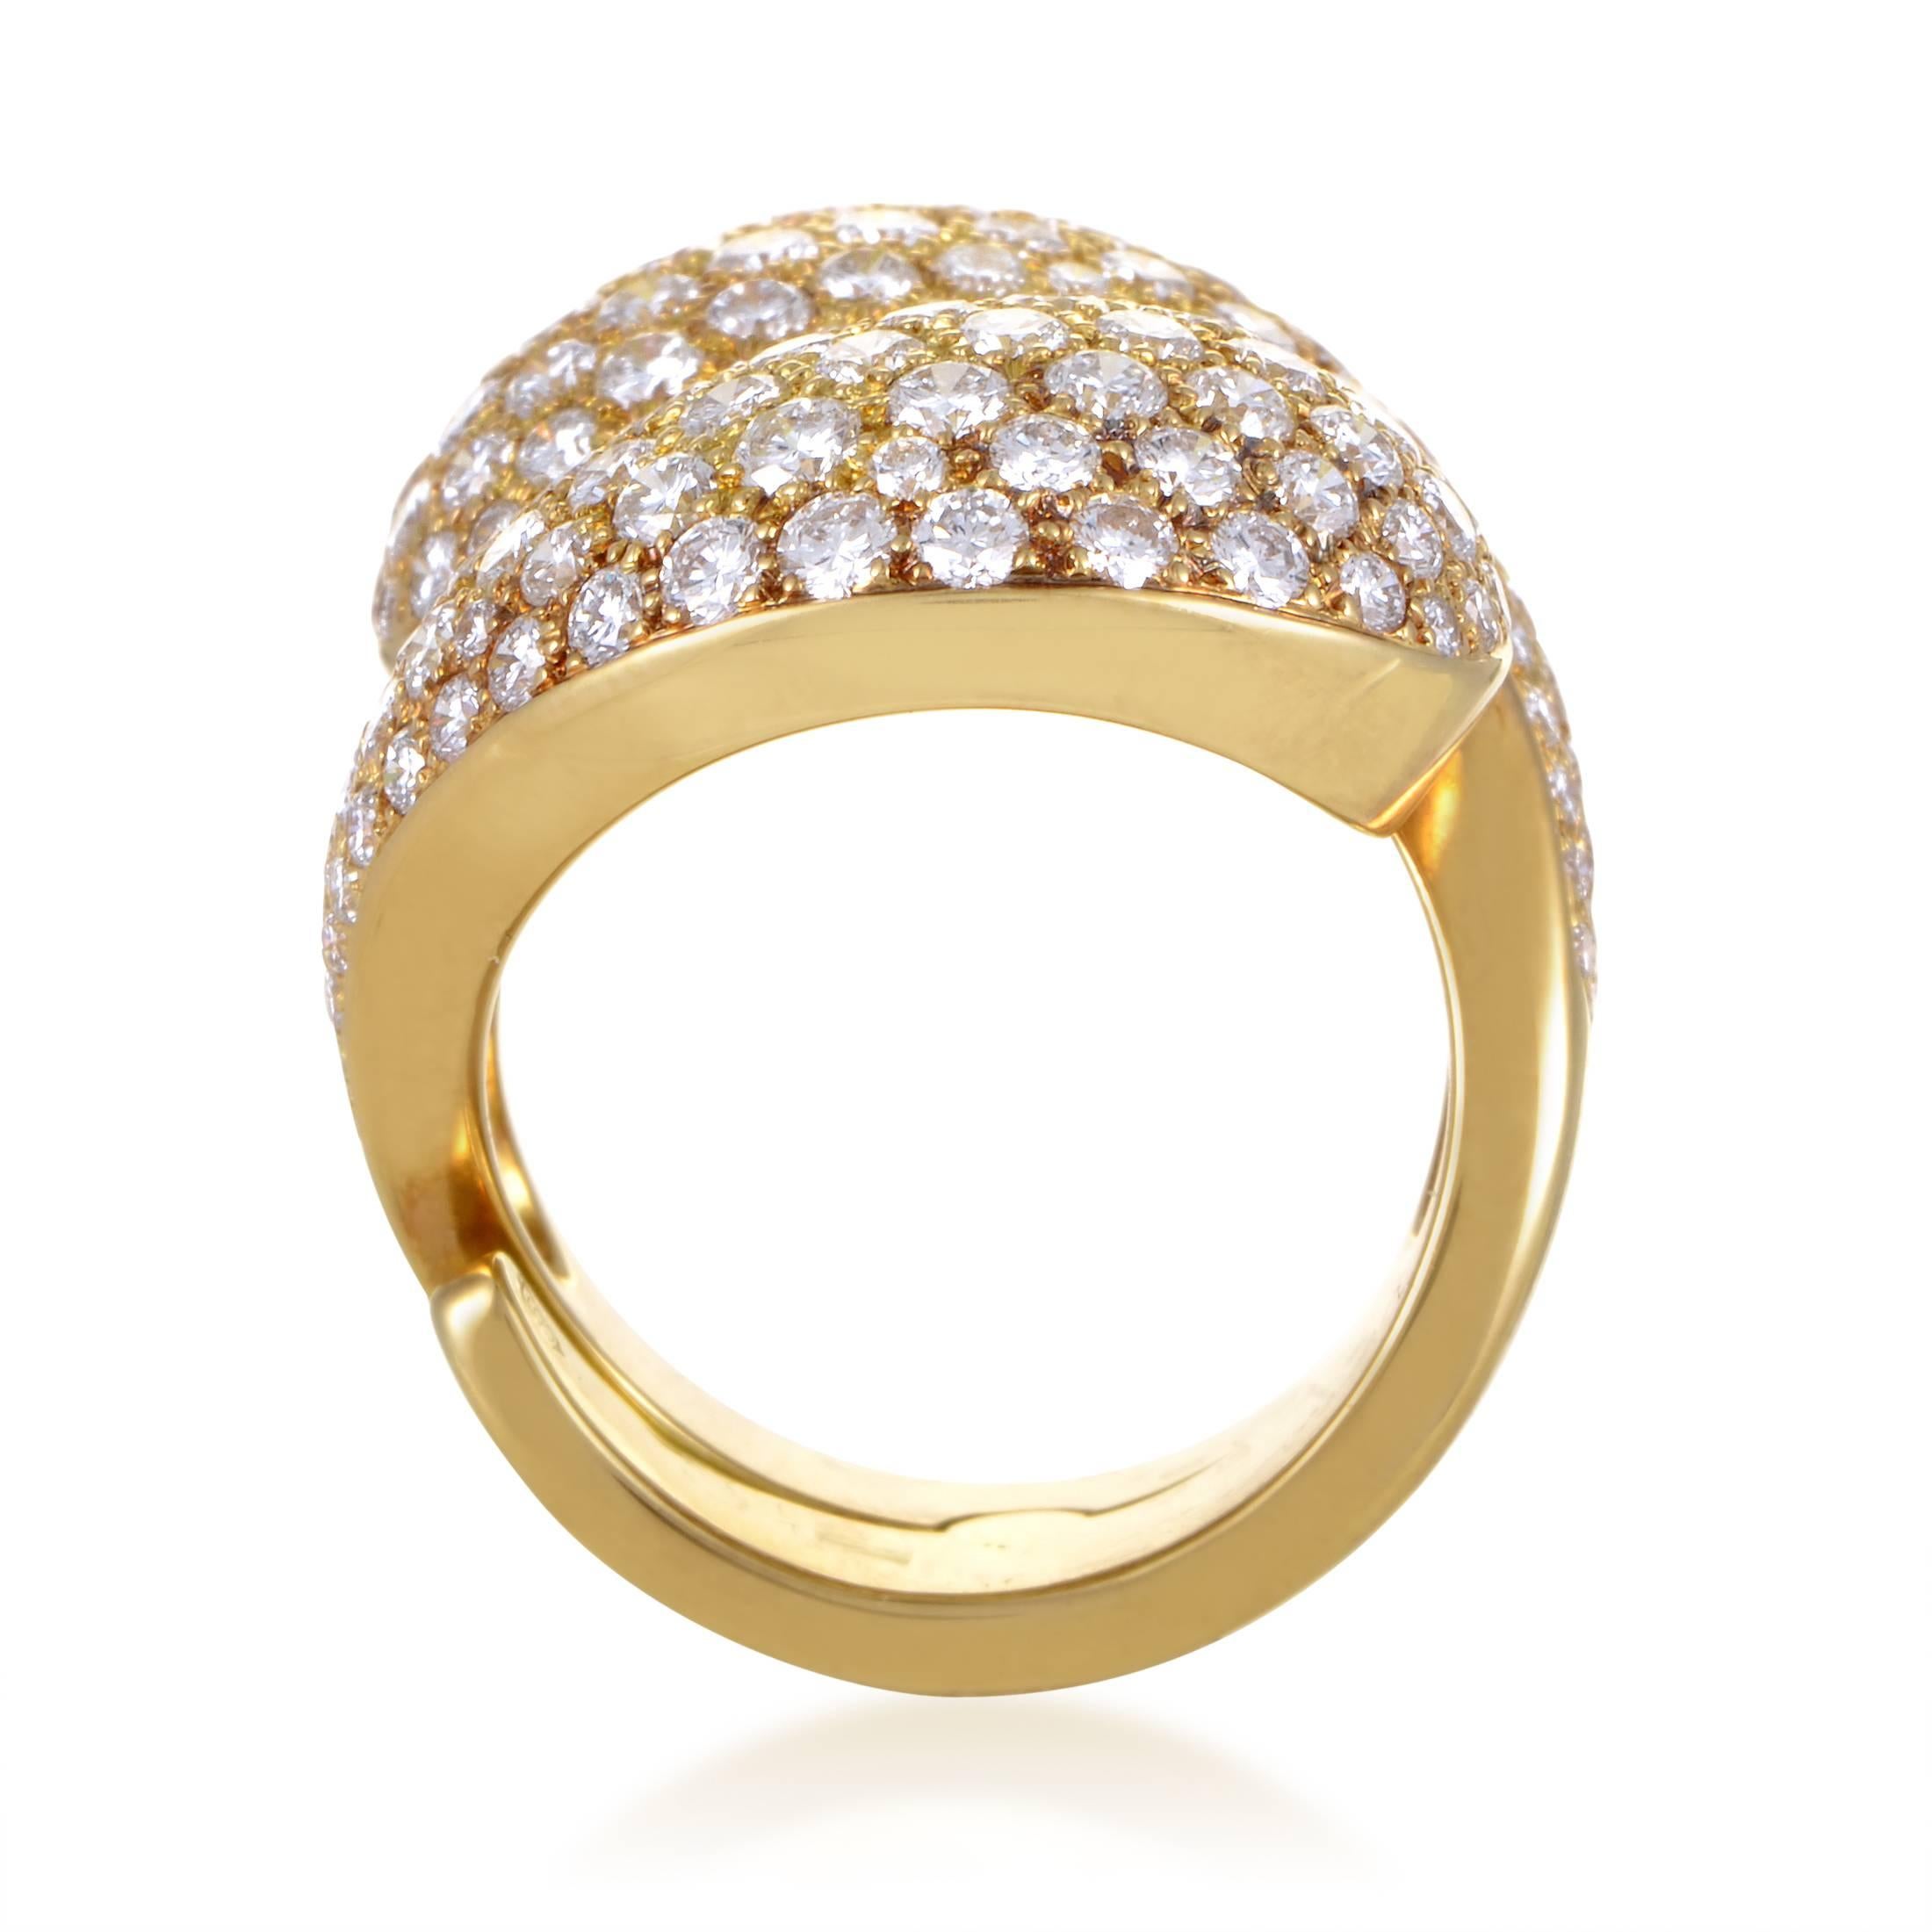 A bounty of gold and diamonds cinches into a spectacular ring design from Cartier. Two twining branches of 18K yellow gold rise in their embrace, then burst into a canopy of pave diamonds. The multitude of diamonds settings weigh in at 5.25ct, and